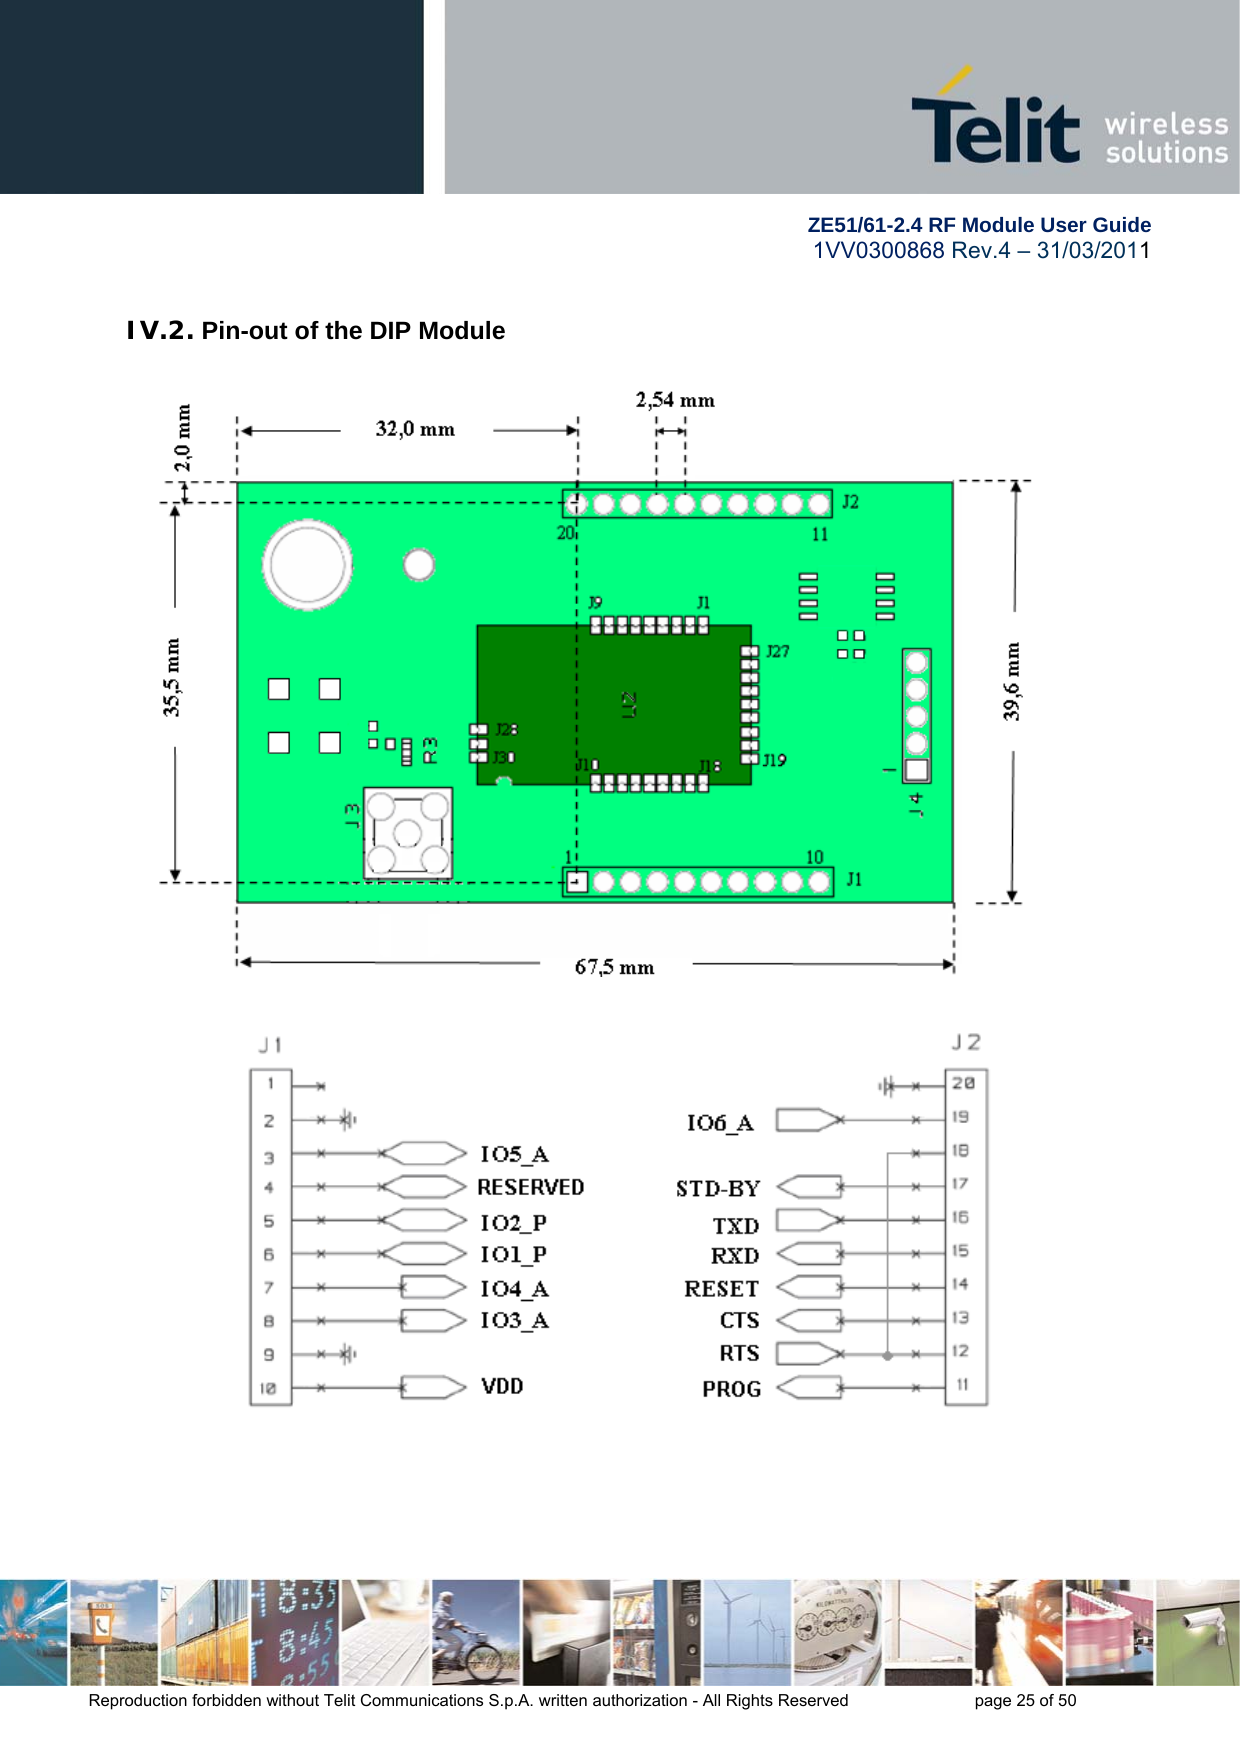        ZE51/61-2.4 RF Module User Guide 1VV0300868 Rev.4 – 31/03/2011 Reproduction forbidden without Telit Communications S.p.A. written authorization - All Rights Reserved    page 25 of 50  IV.2. Pin-out of the DIP Module      